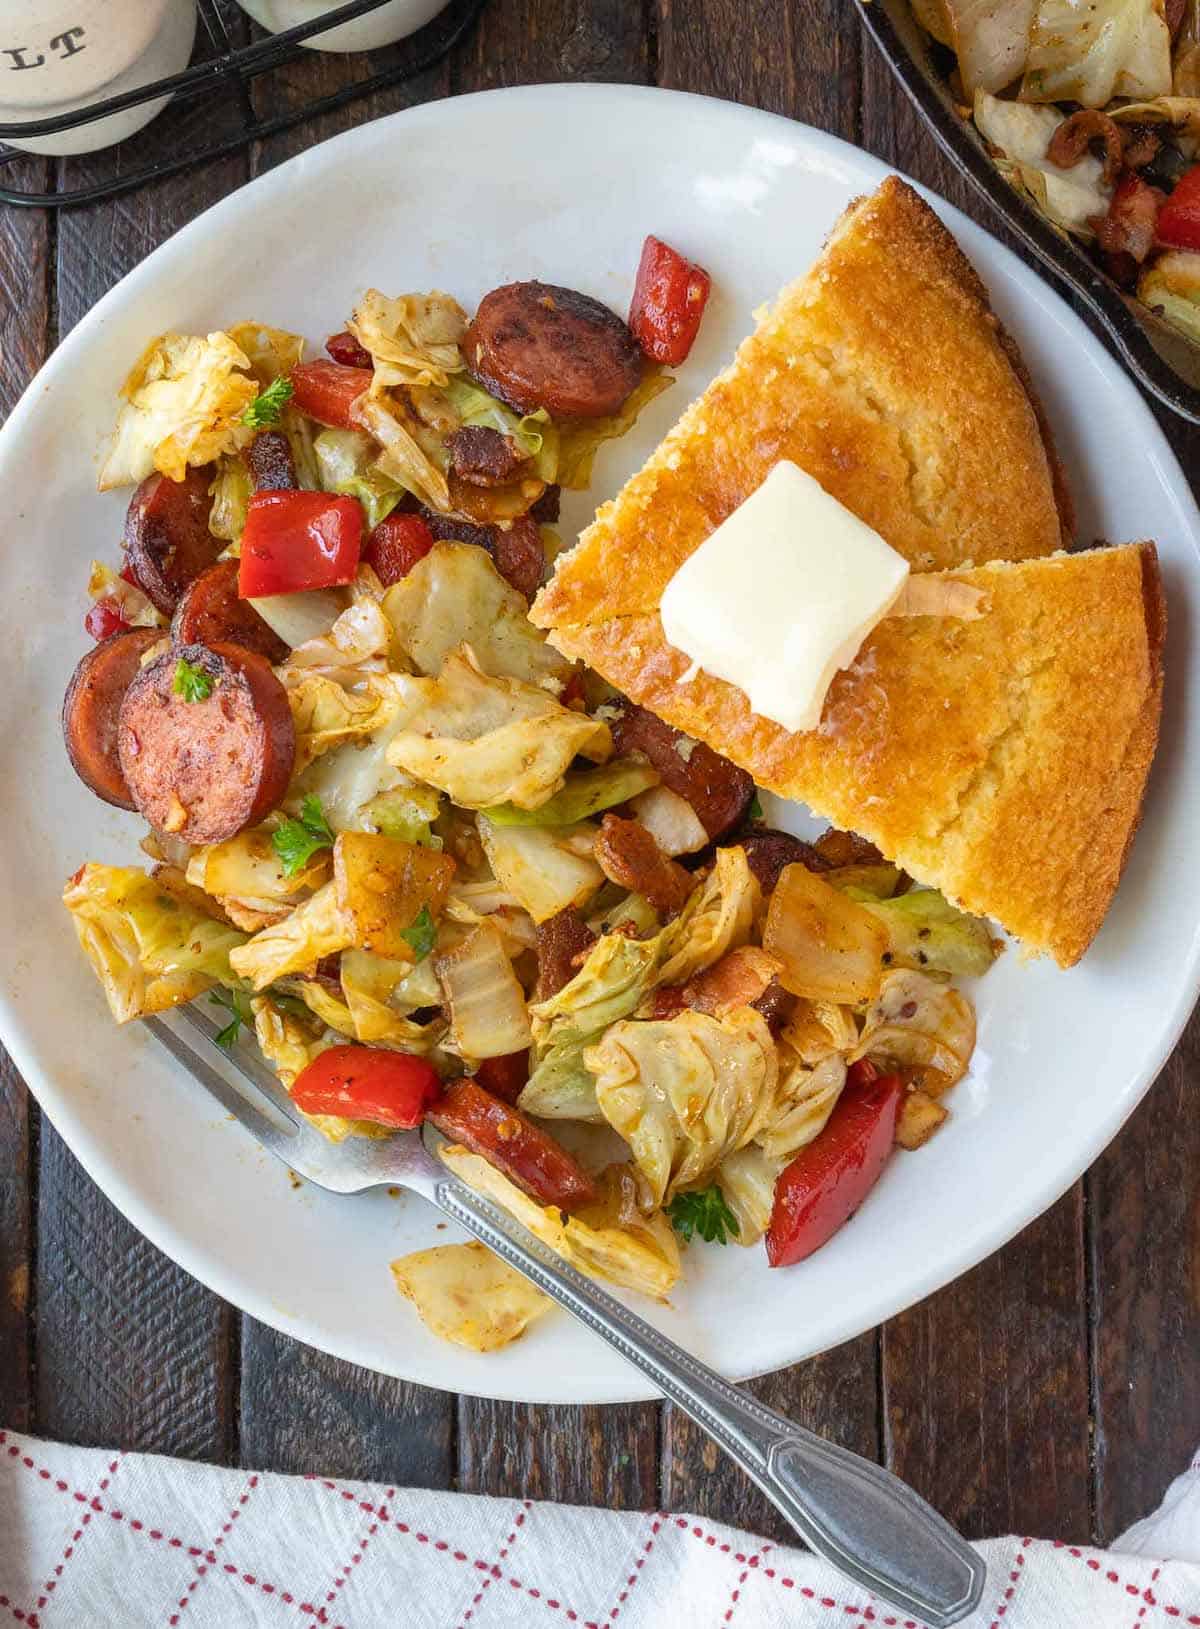 Fried cabbage and sausage on a white plate with a side of cornbread.